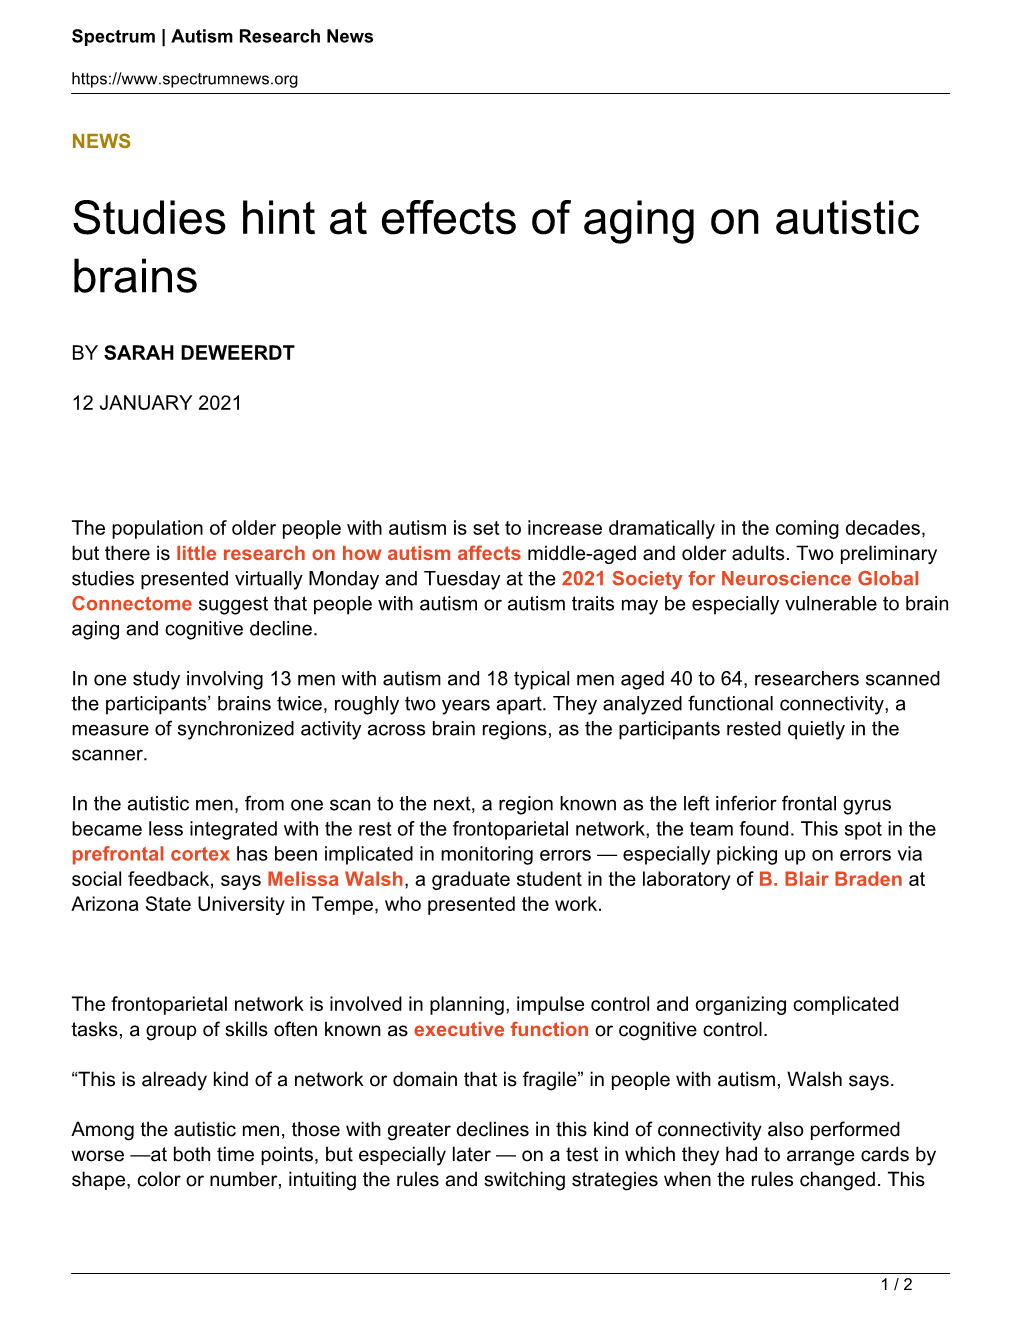 Studies Hint at Effects of Aging on Autistic Brains